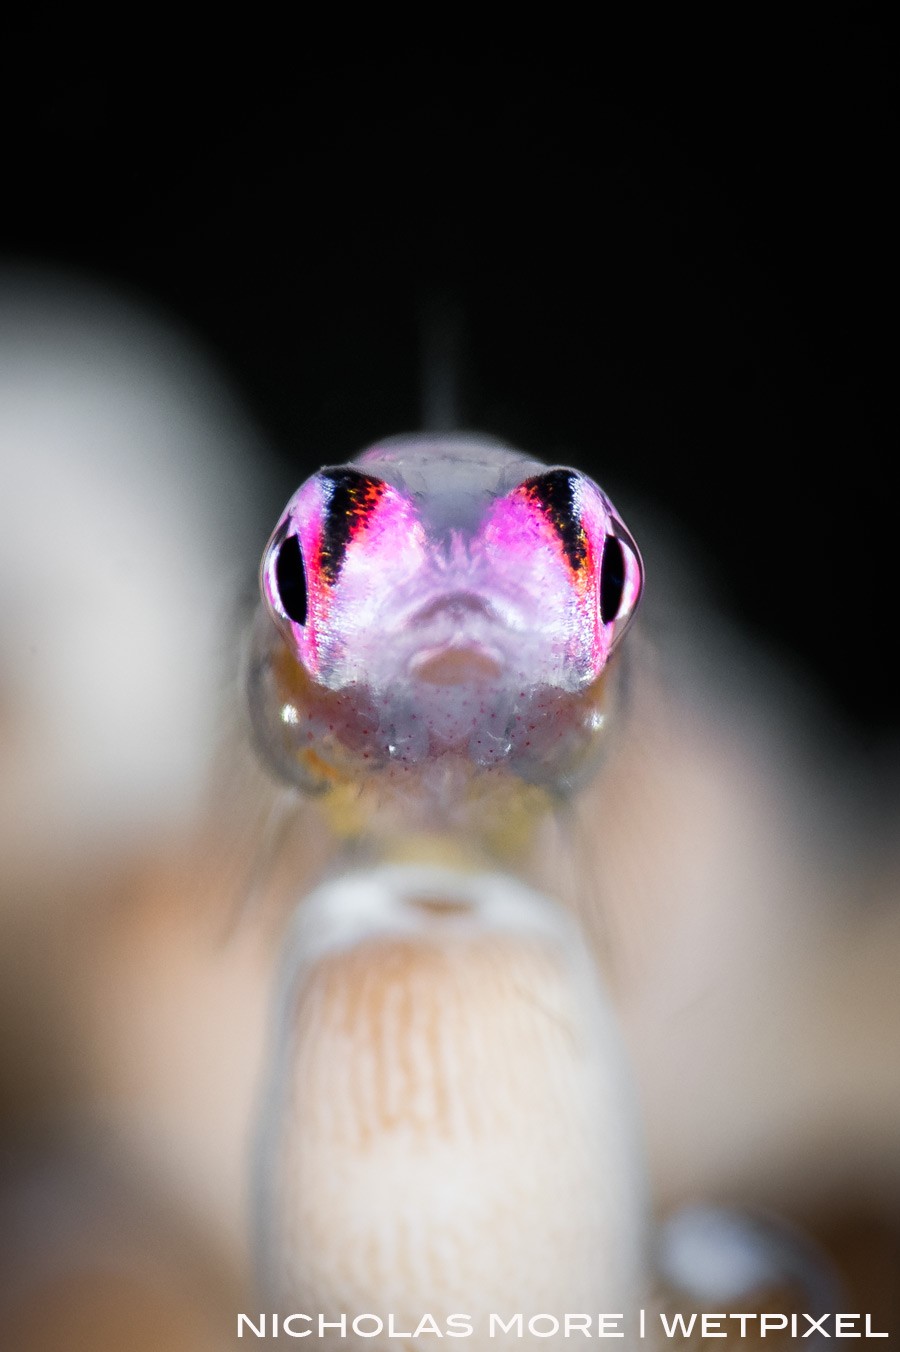 Pink Eyed Goby